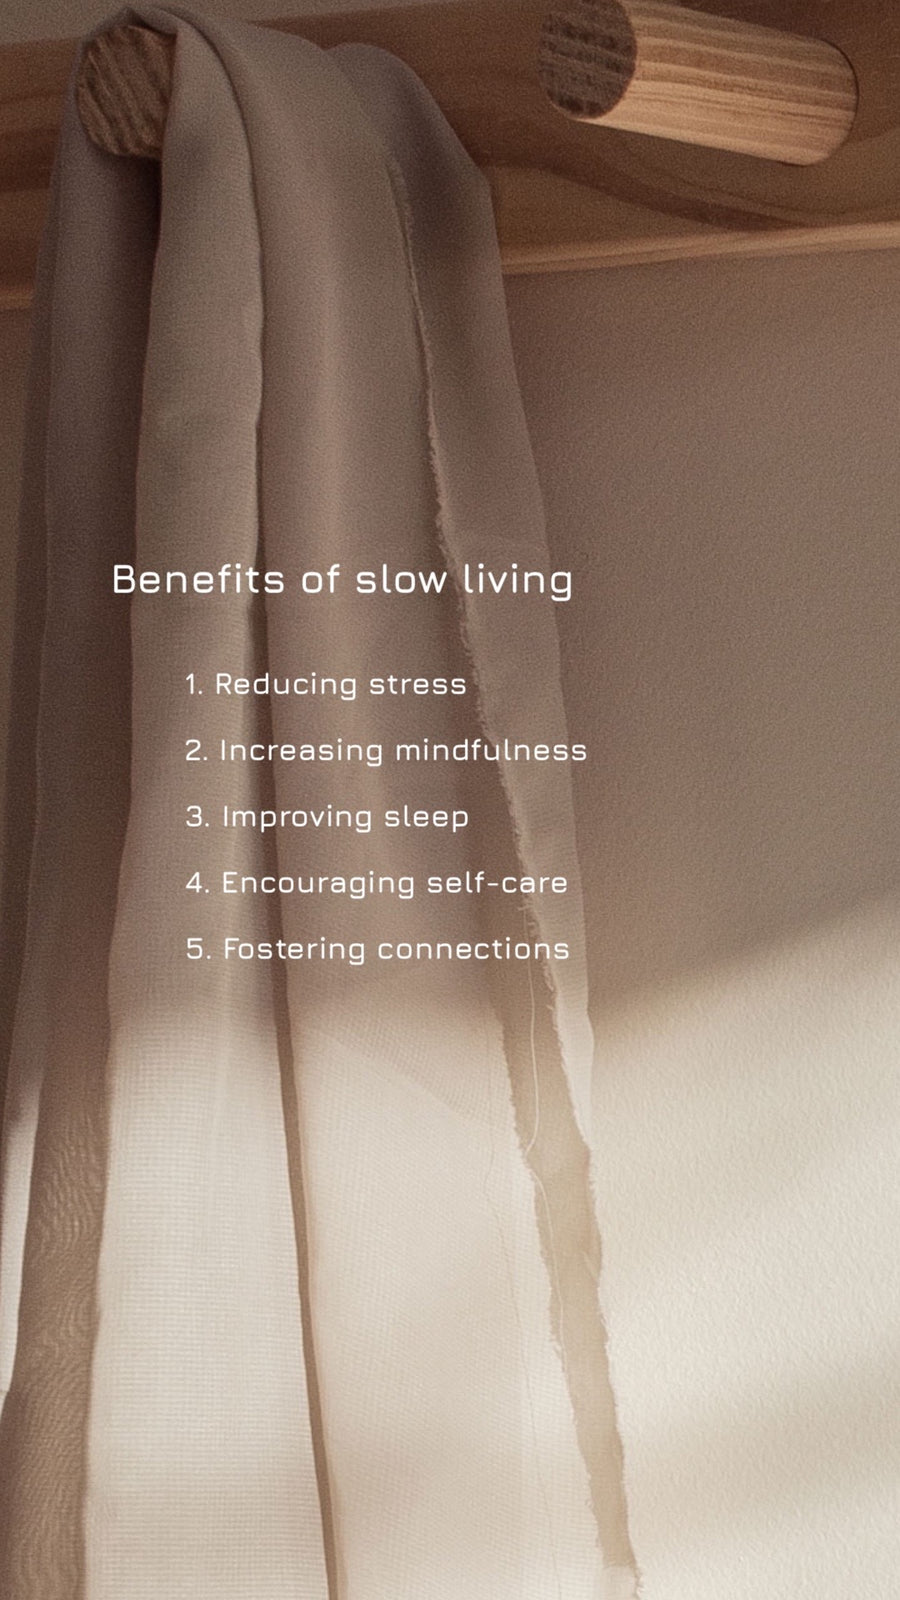 How slow living can help nurture your wellbeing